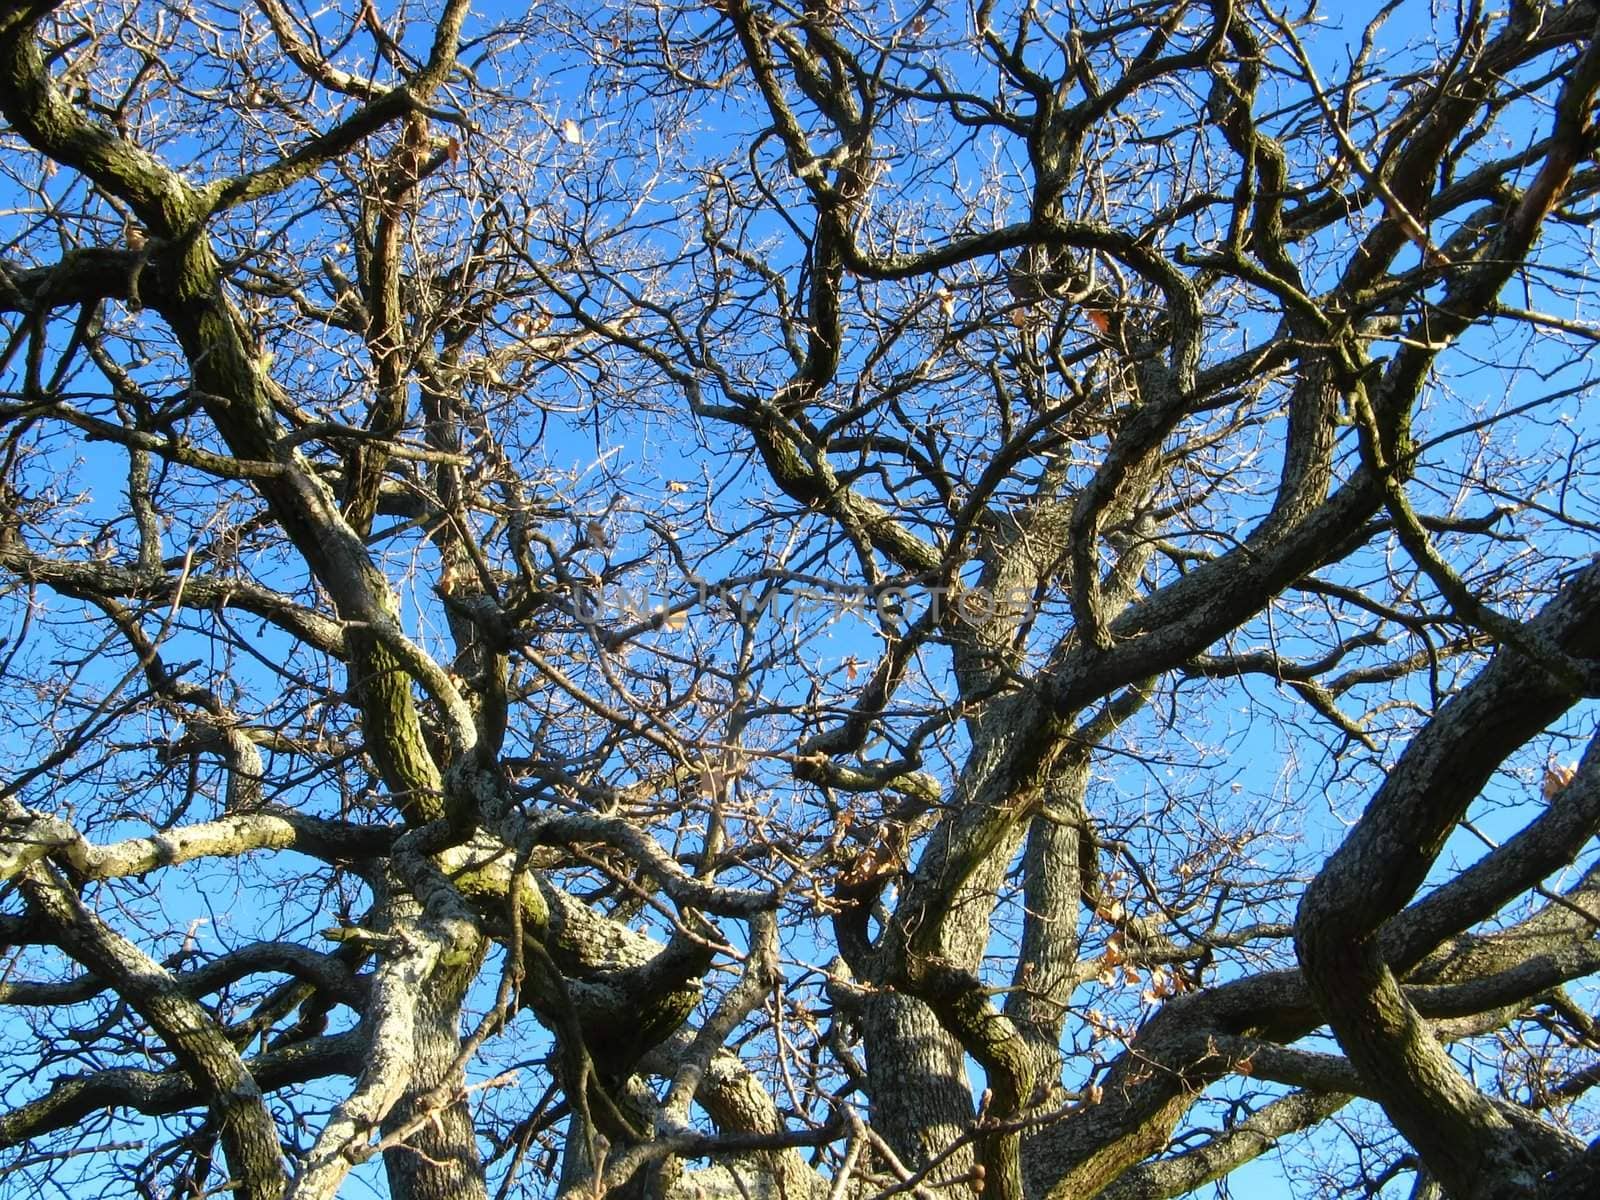 image of some oak branches in a blue sky